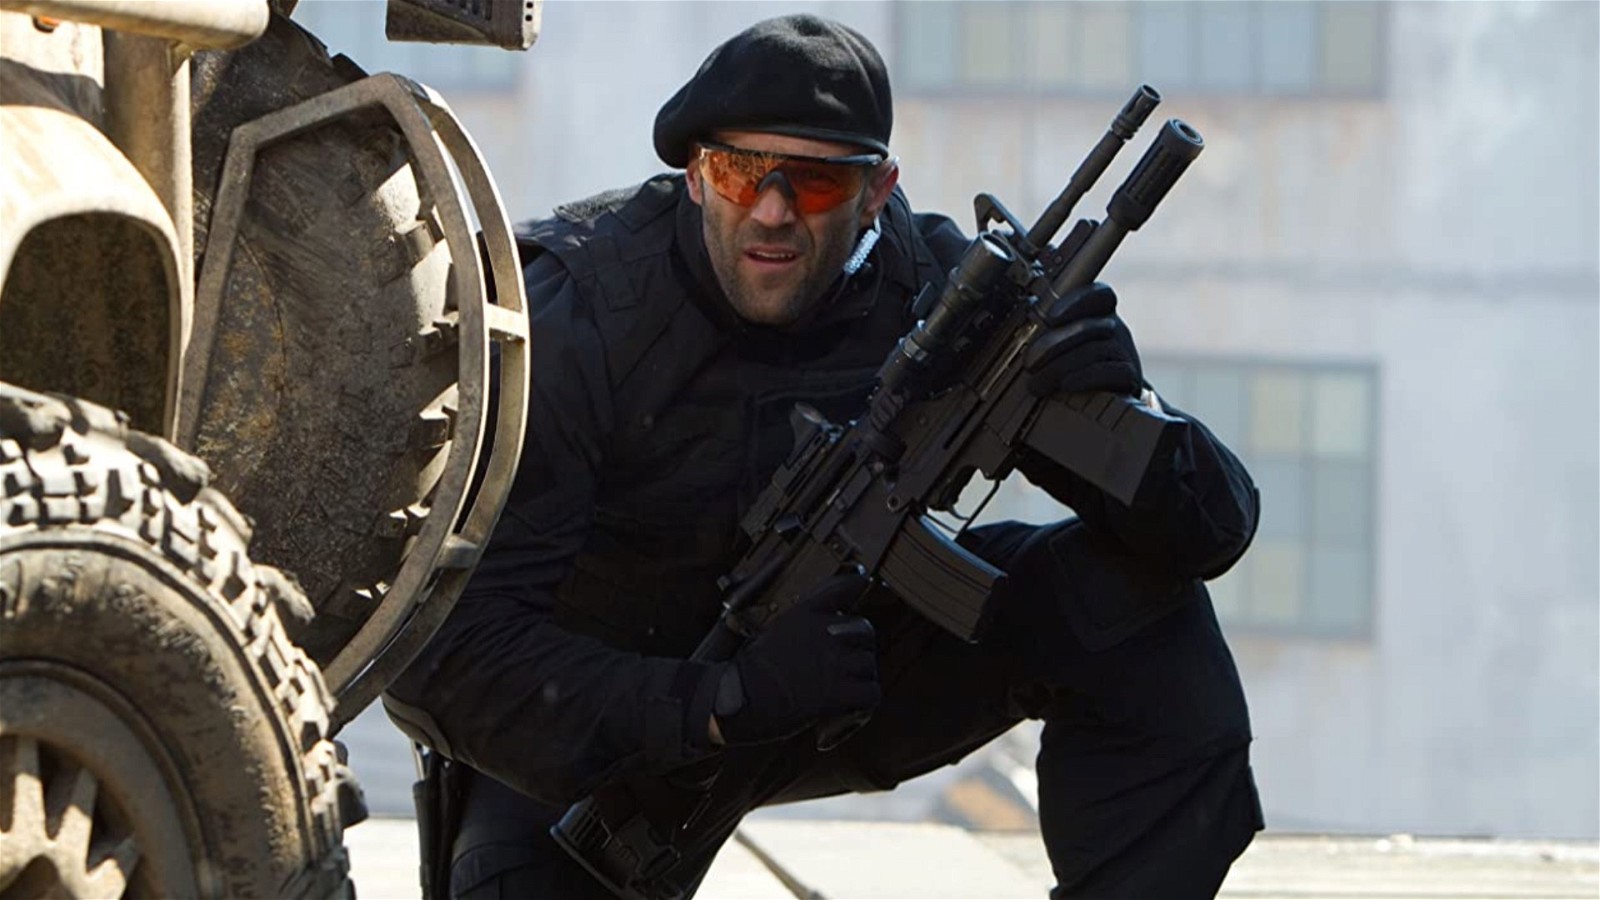 Jason Statham as Lee Christmas in The Expendables